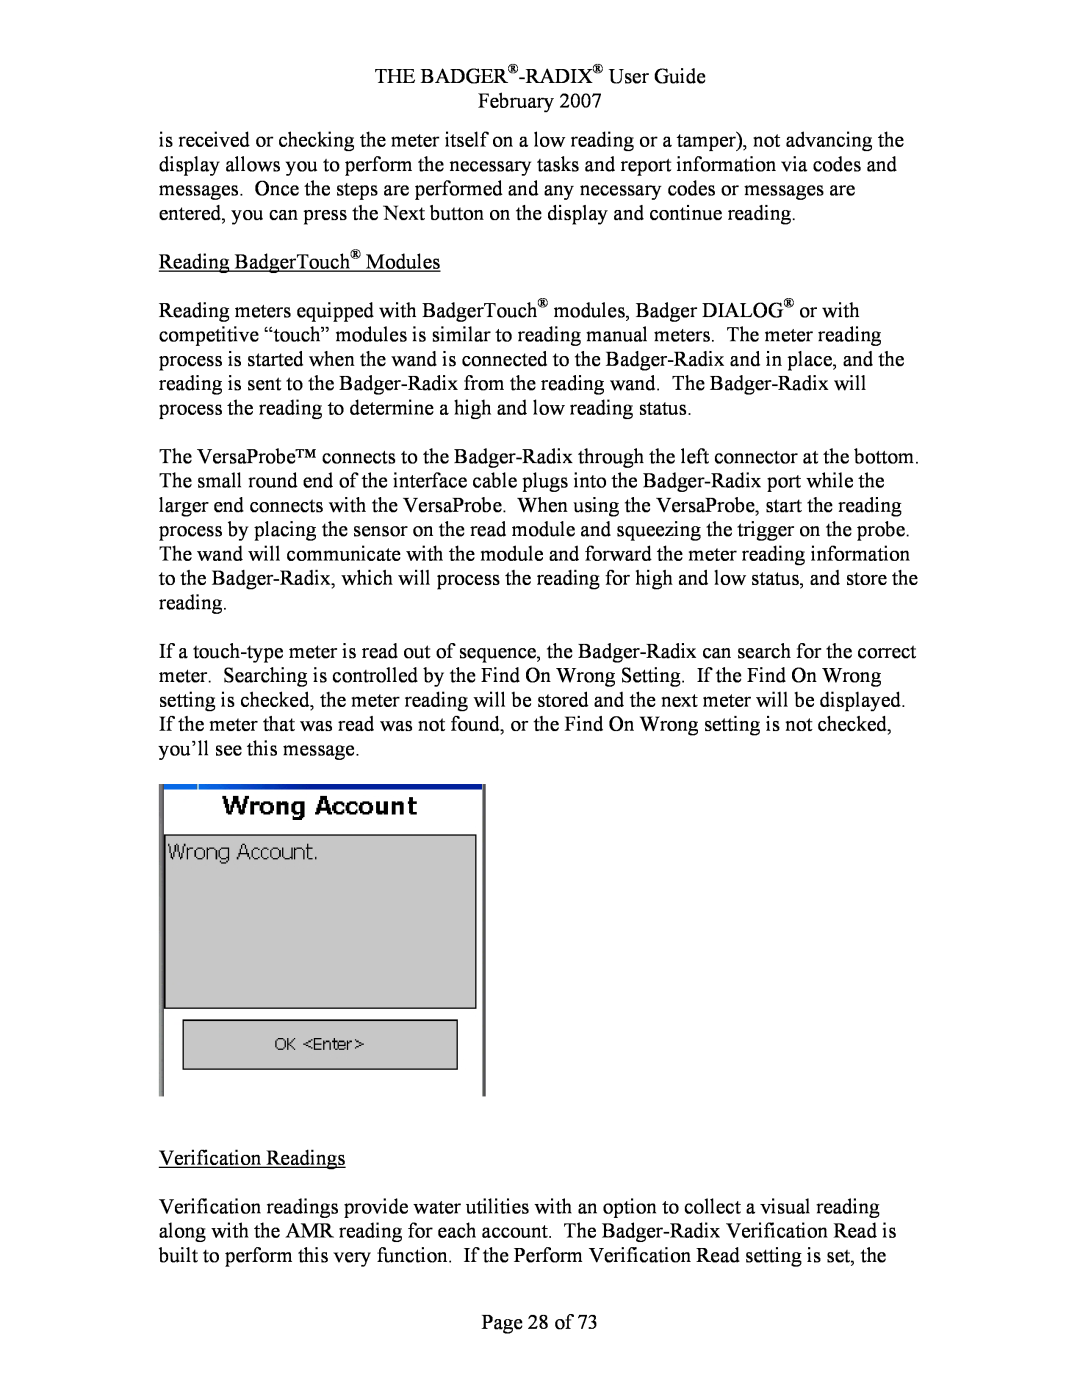 Badger Basket RAD-IOM-01, N64944-001 operation manual Reading BadgerTouch Modules, Verification Readings, Page 28 of 